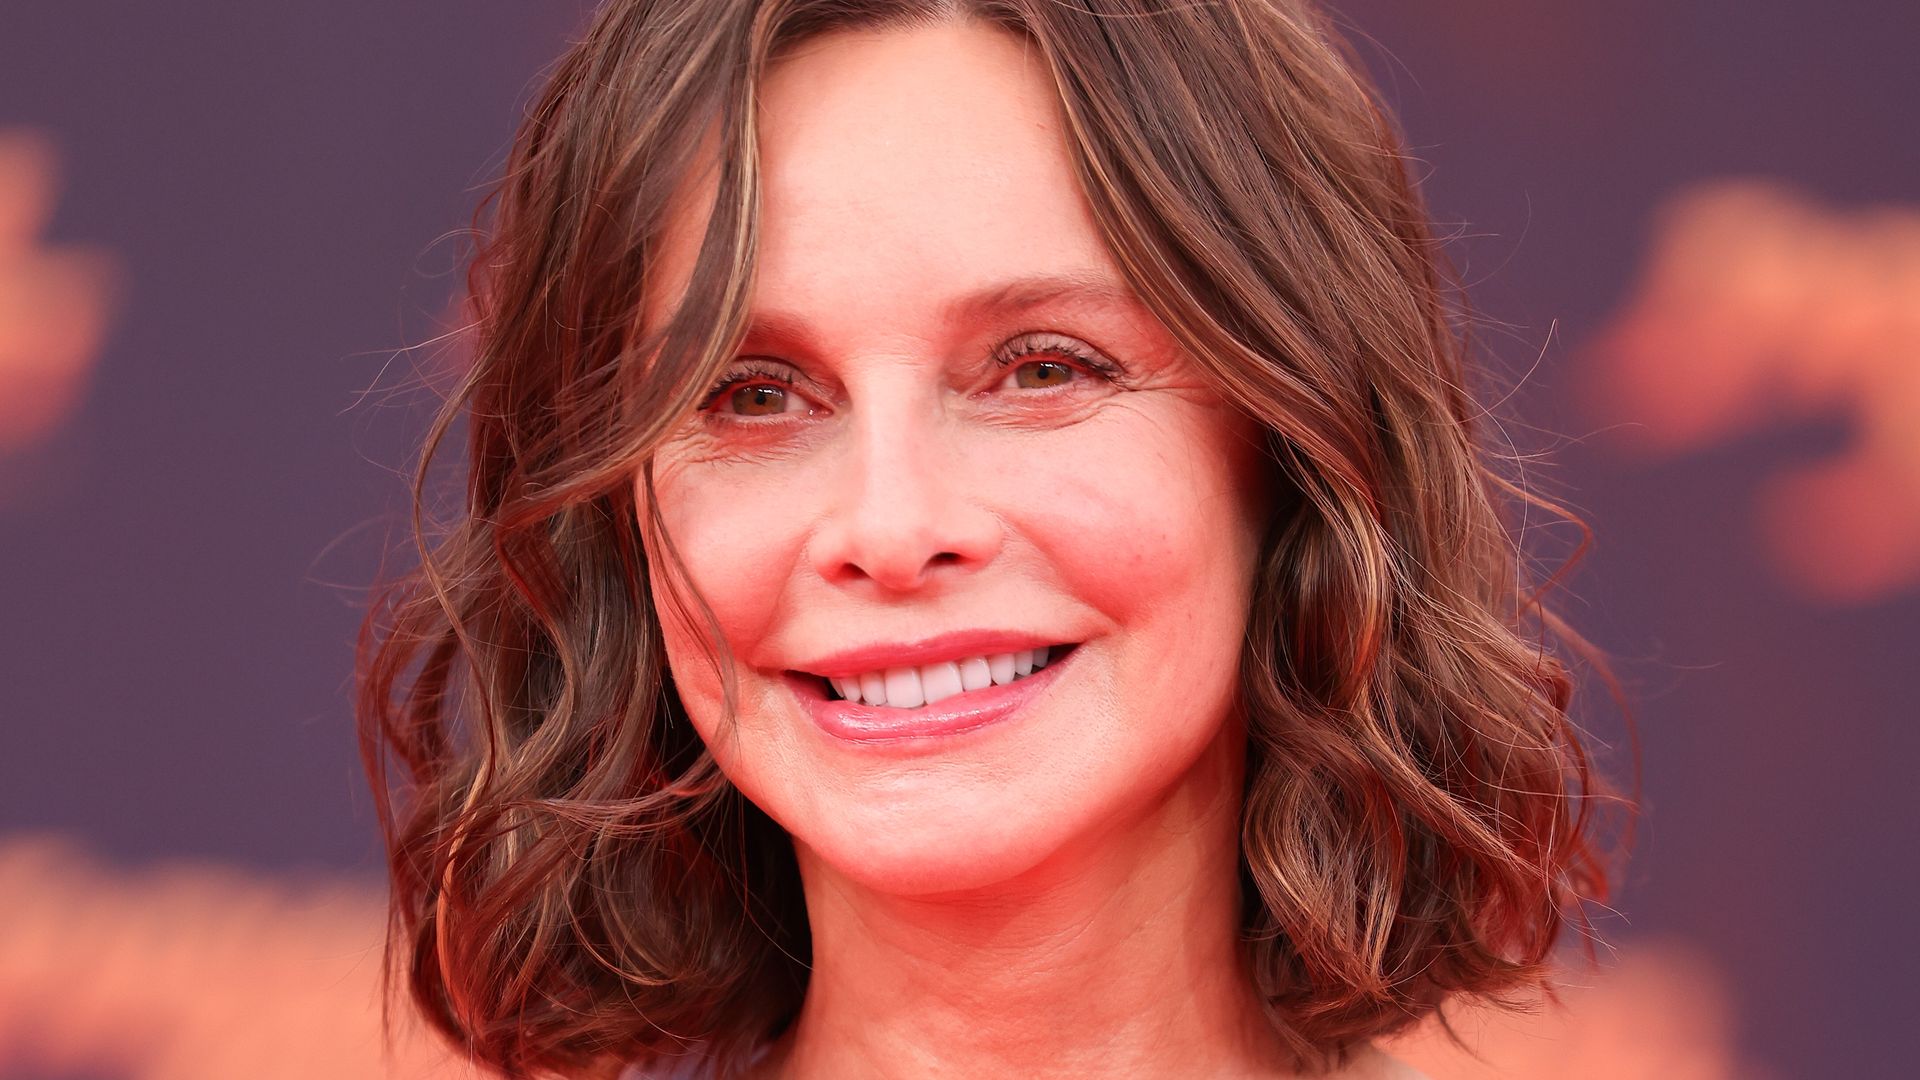 Calista Flockhart smiling at a red carpet photo shoot